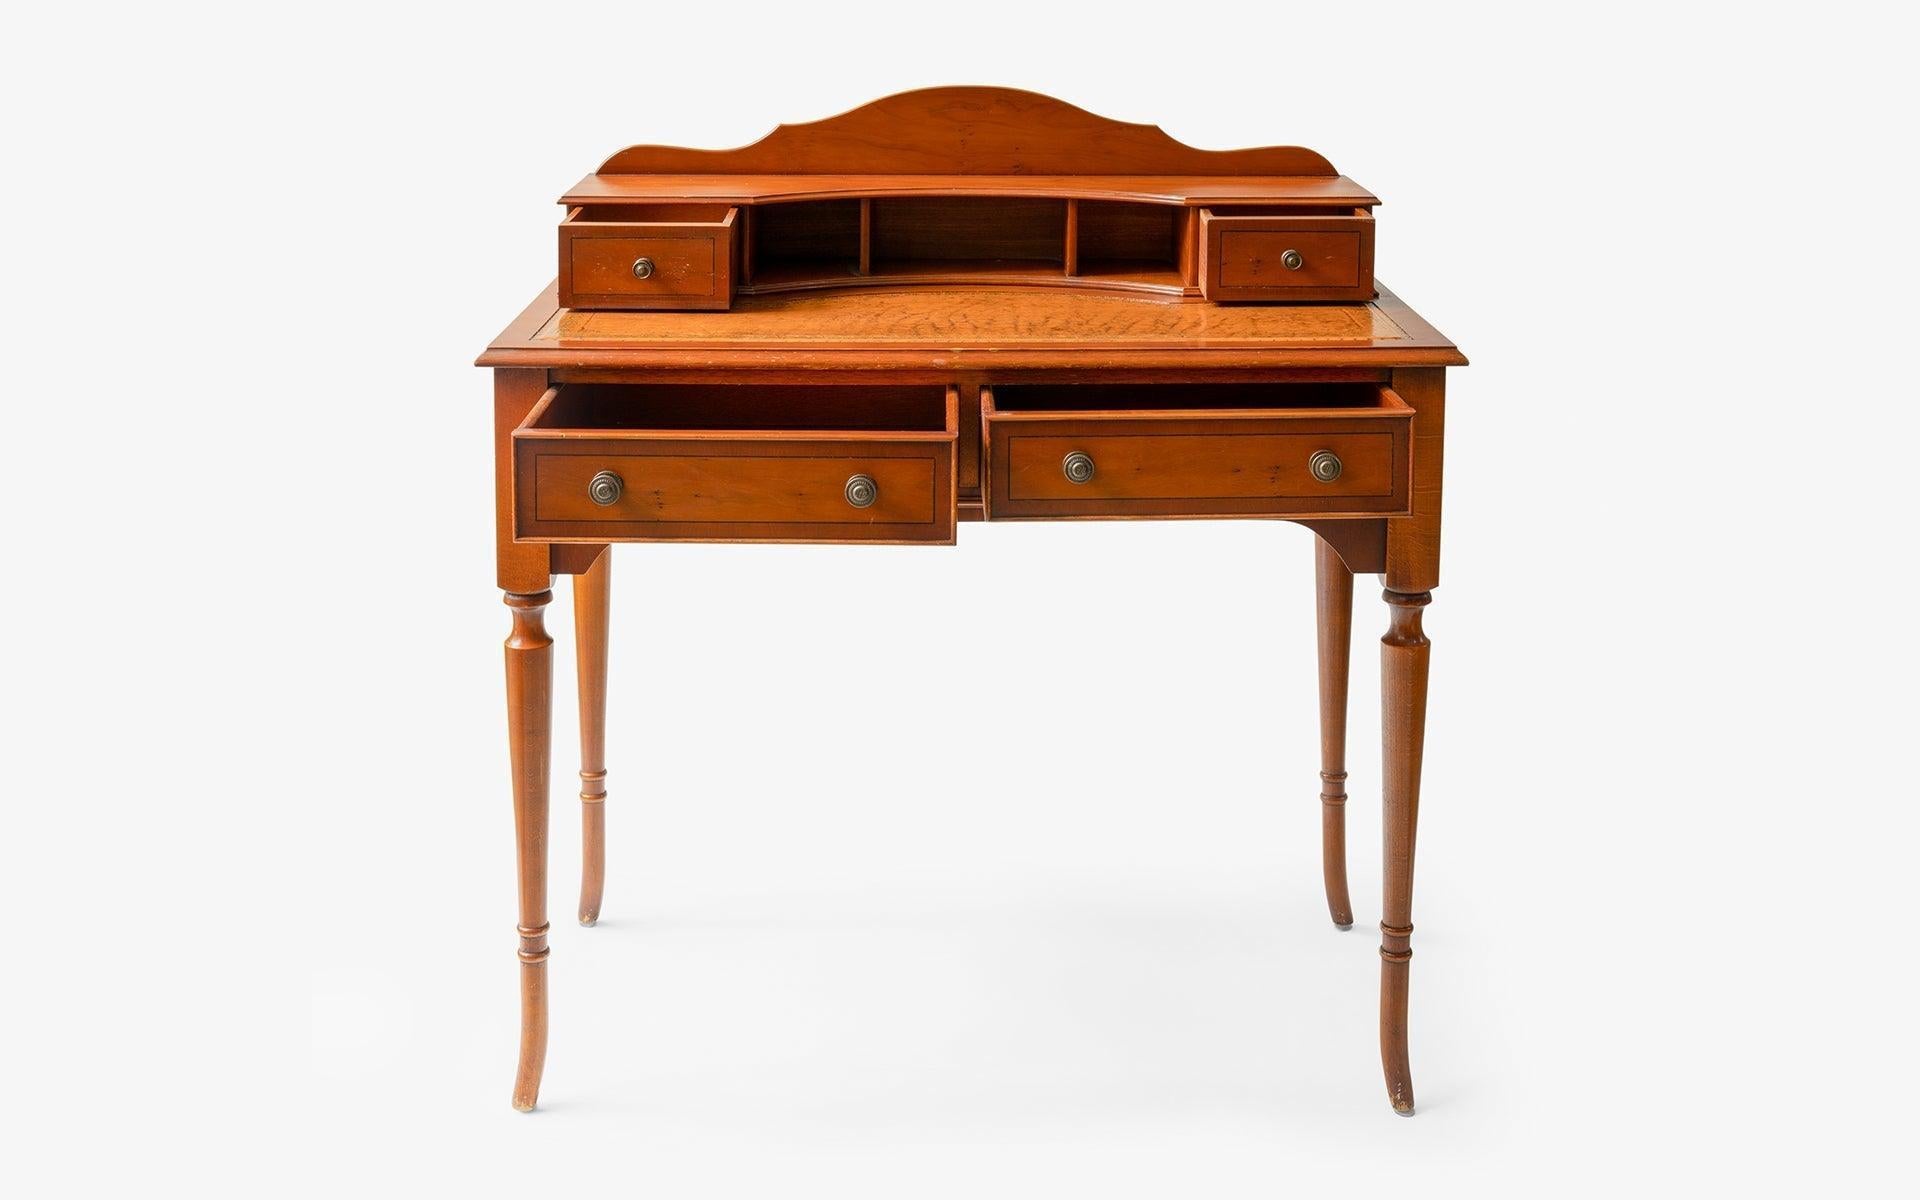 One of the rare and unique pieces in the selection, this English desk showcases a combination of antique and craftsmanship. With its aesthetic appearance and functional design, it stands out among the rest. The desk features a leather-covered top